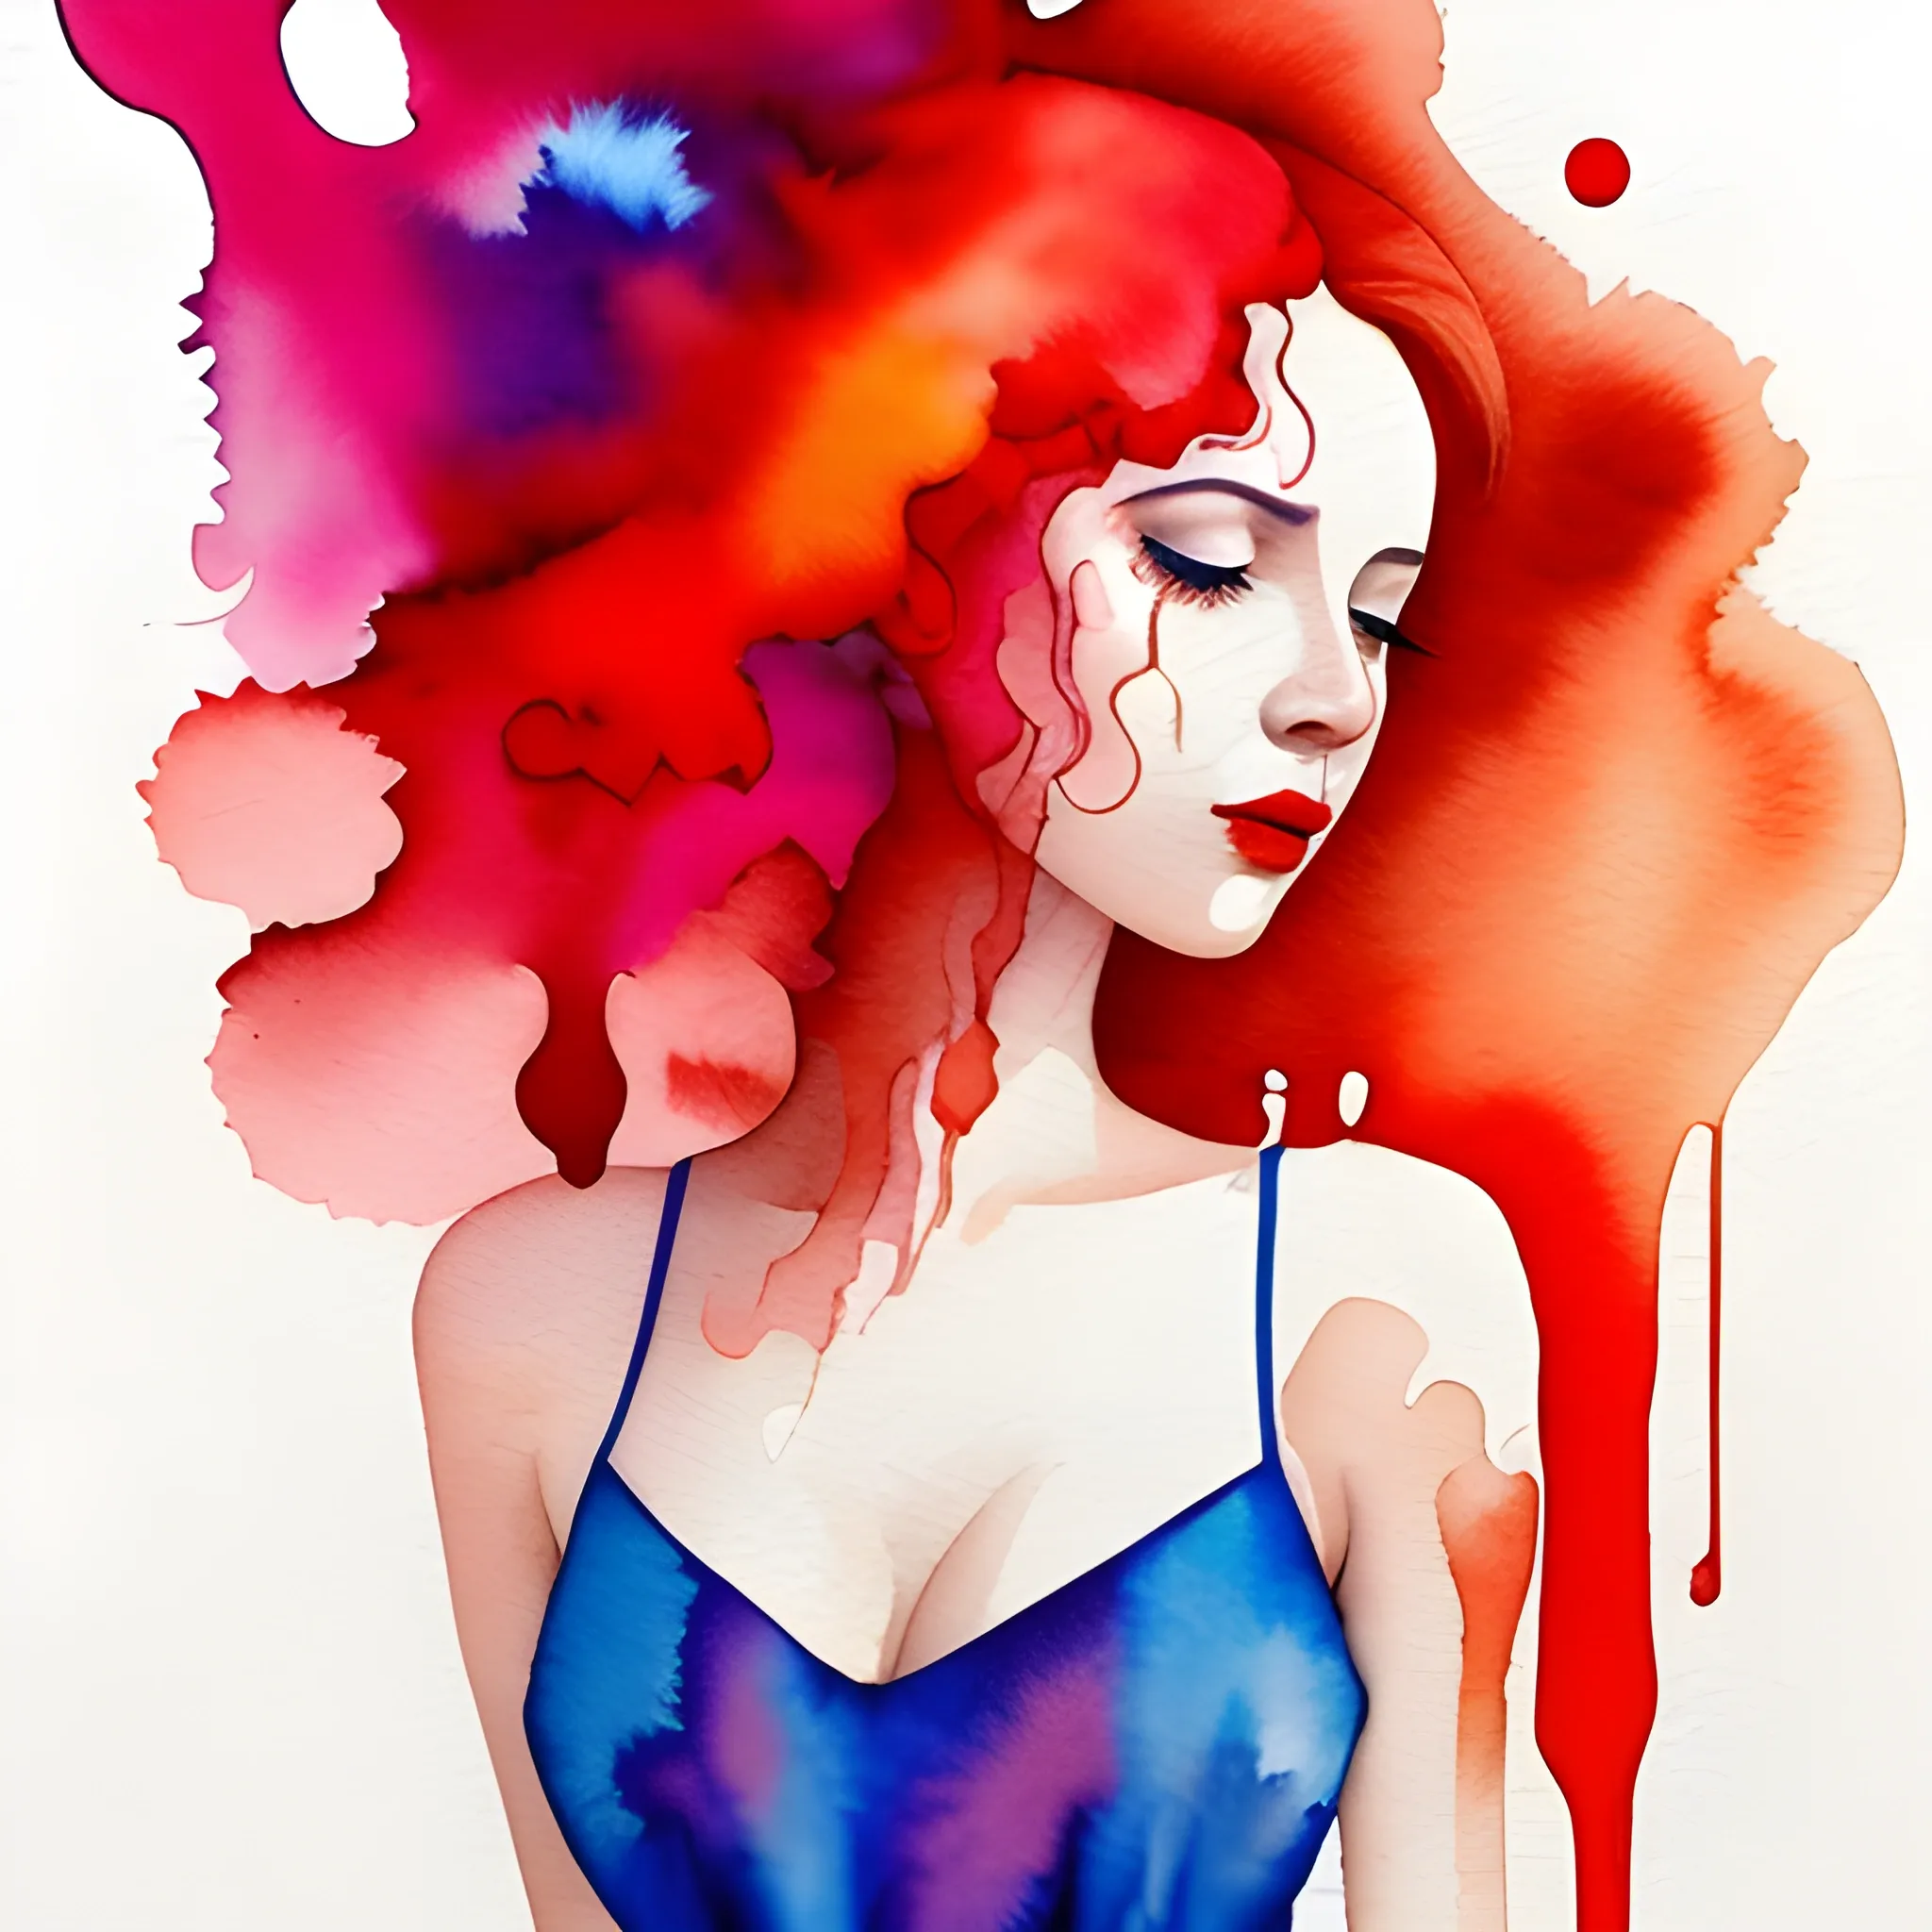 Create a watercolor illustration using only the color red. Depict a woman with a dress dripping with vibrant colors, blending into a surrealistic world of liquids.